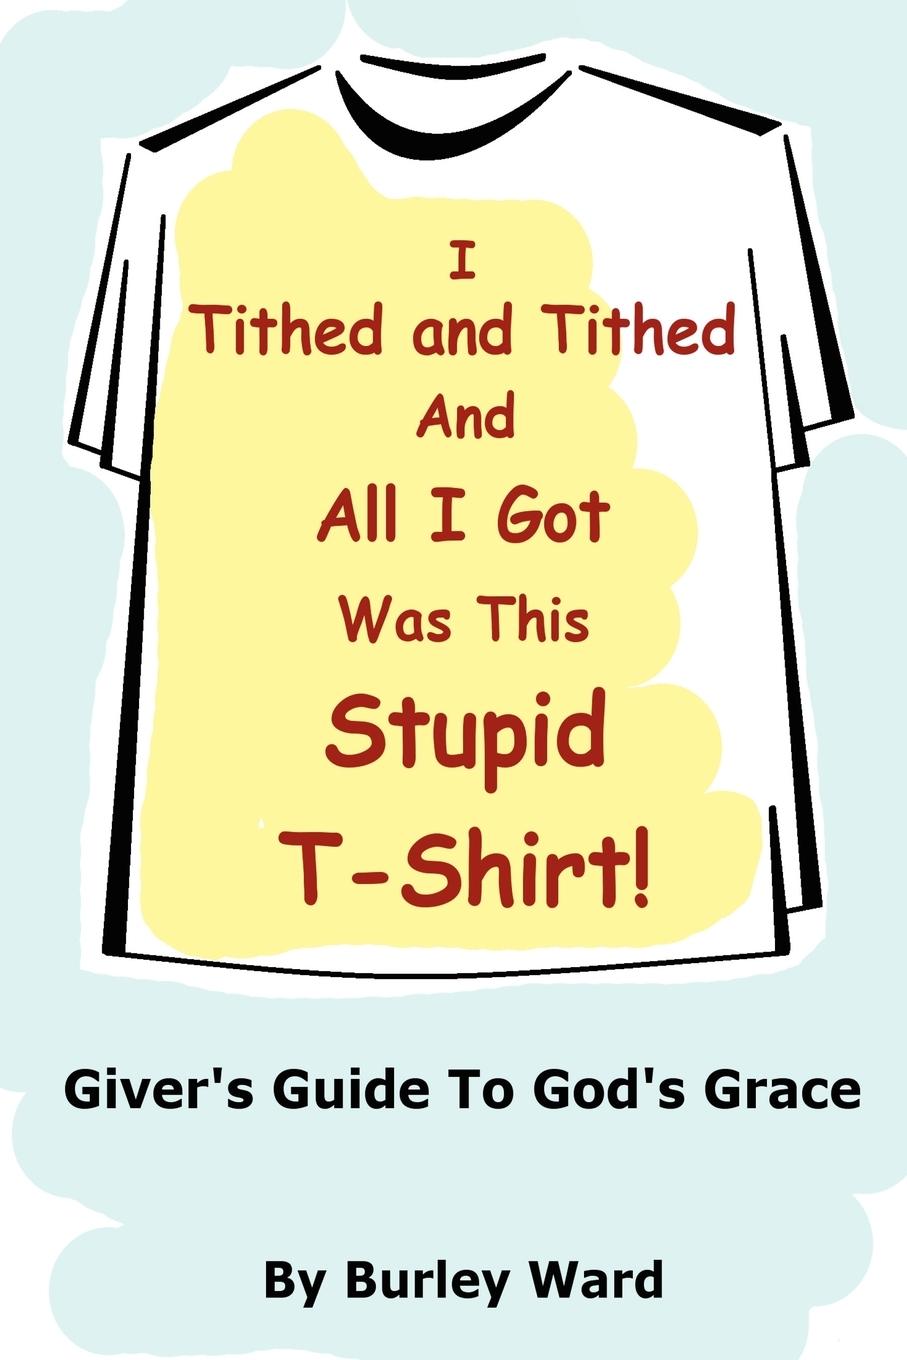 I Tithed And Tithed And All I Got Was This Stupid T-Shirt - Ward, Burley